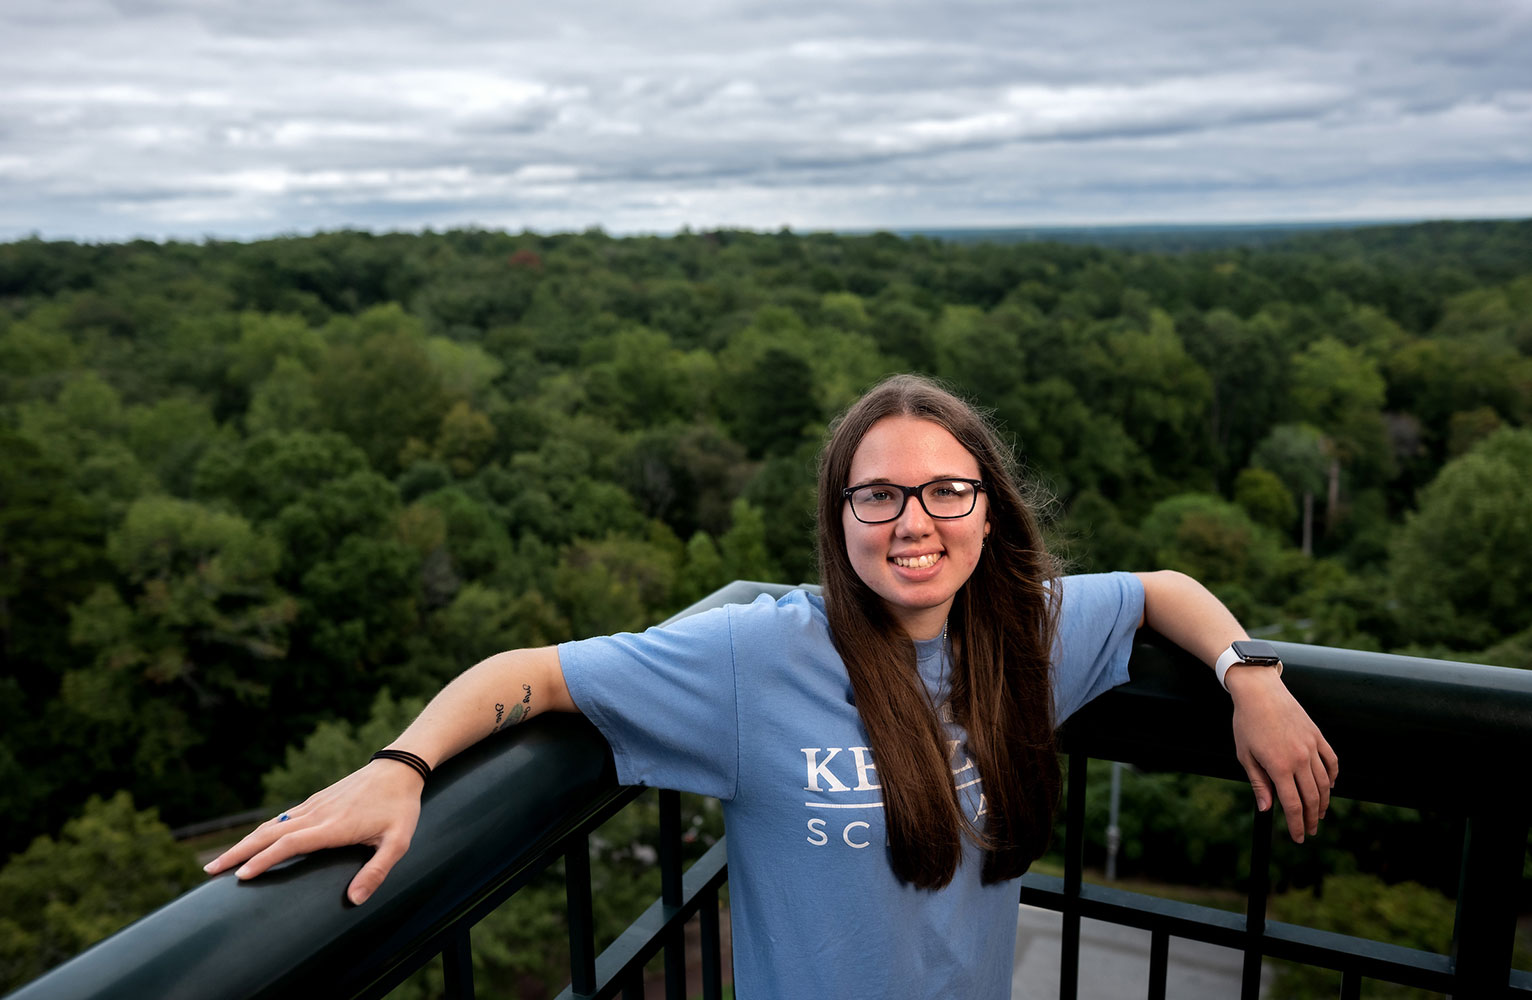 Kessler Scholar Emily Shipway stands on a rooftop leaning against a railing with trees and sky in the background